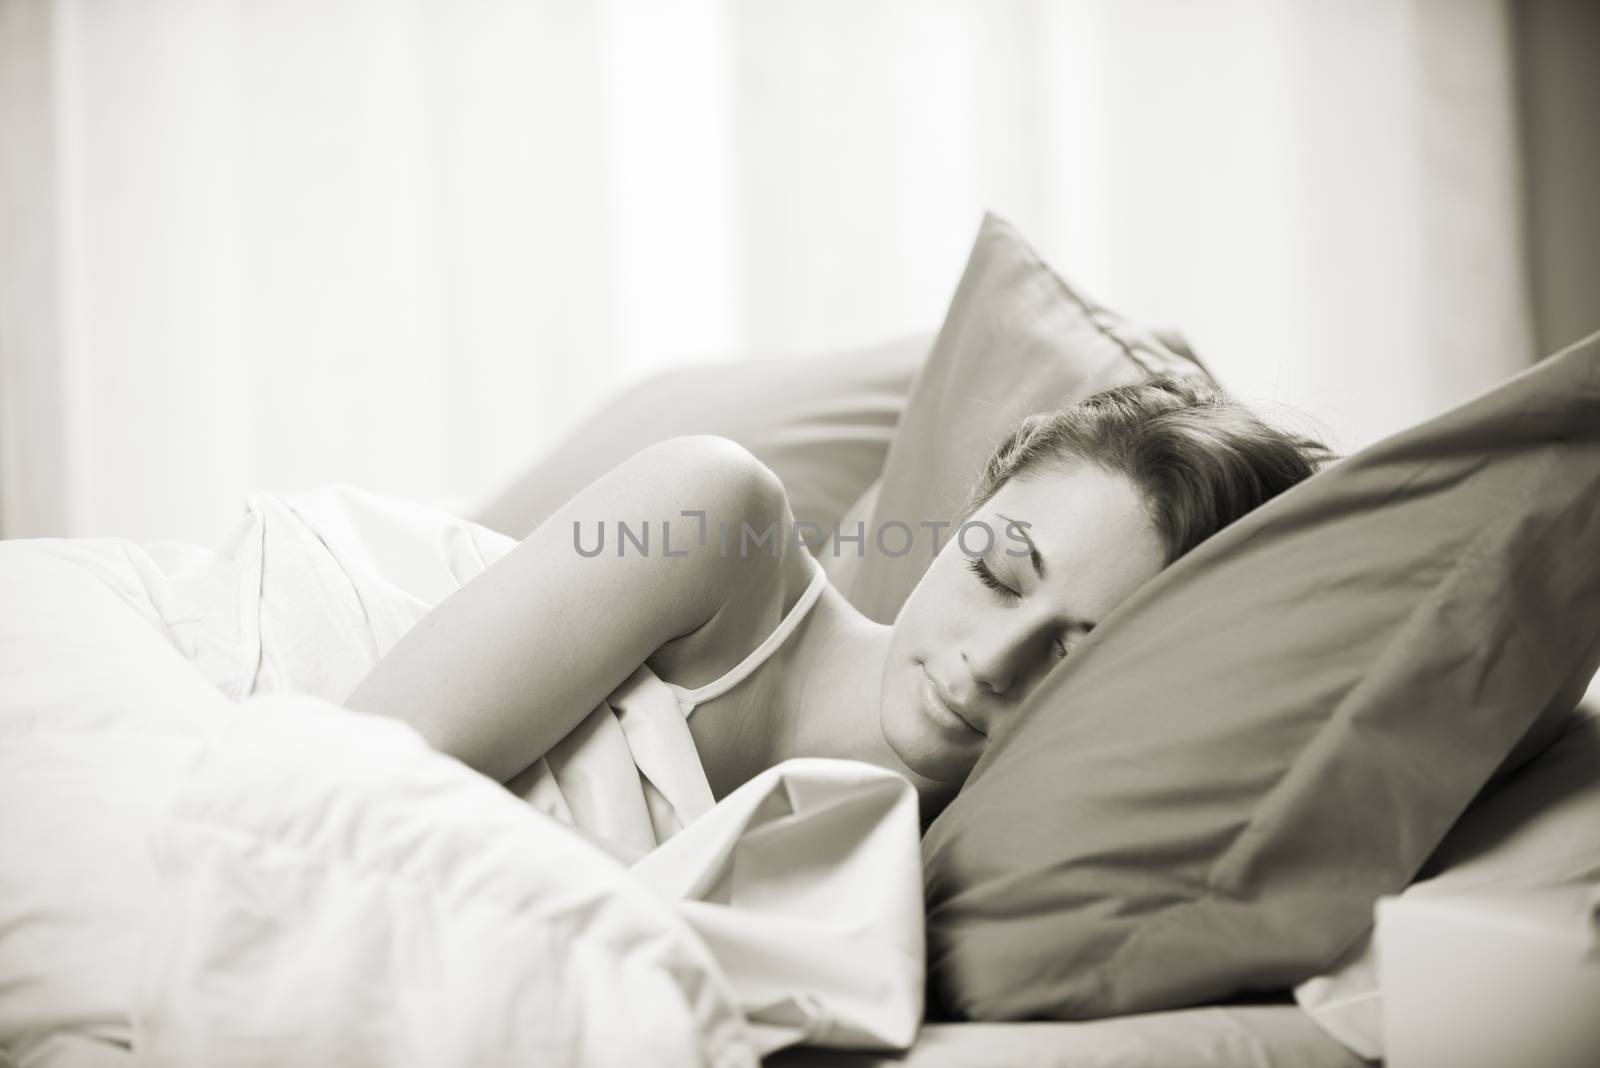 Young beautiful woman sleeping comfortably on bed